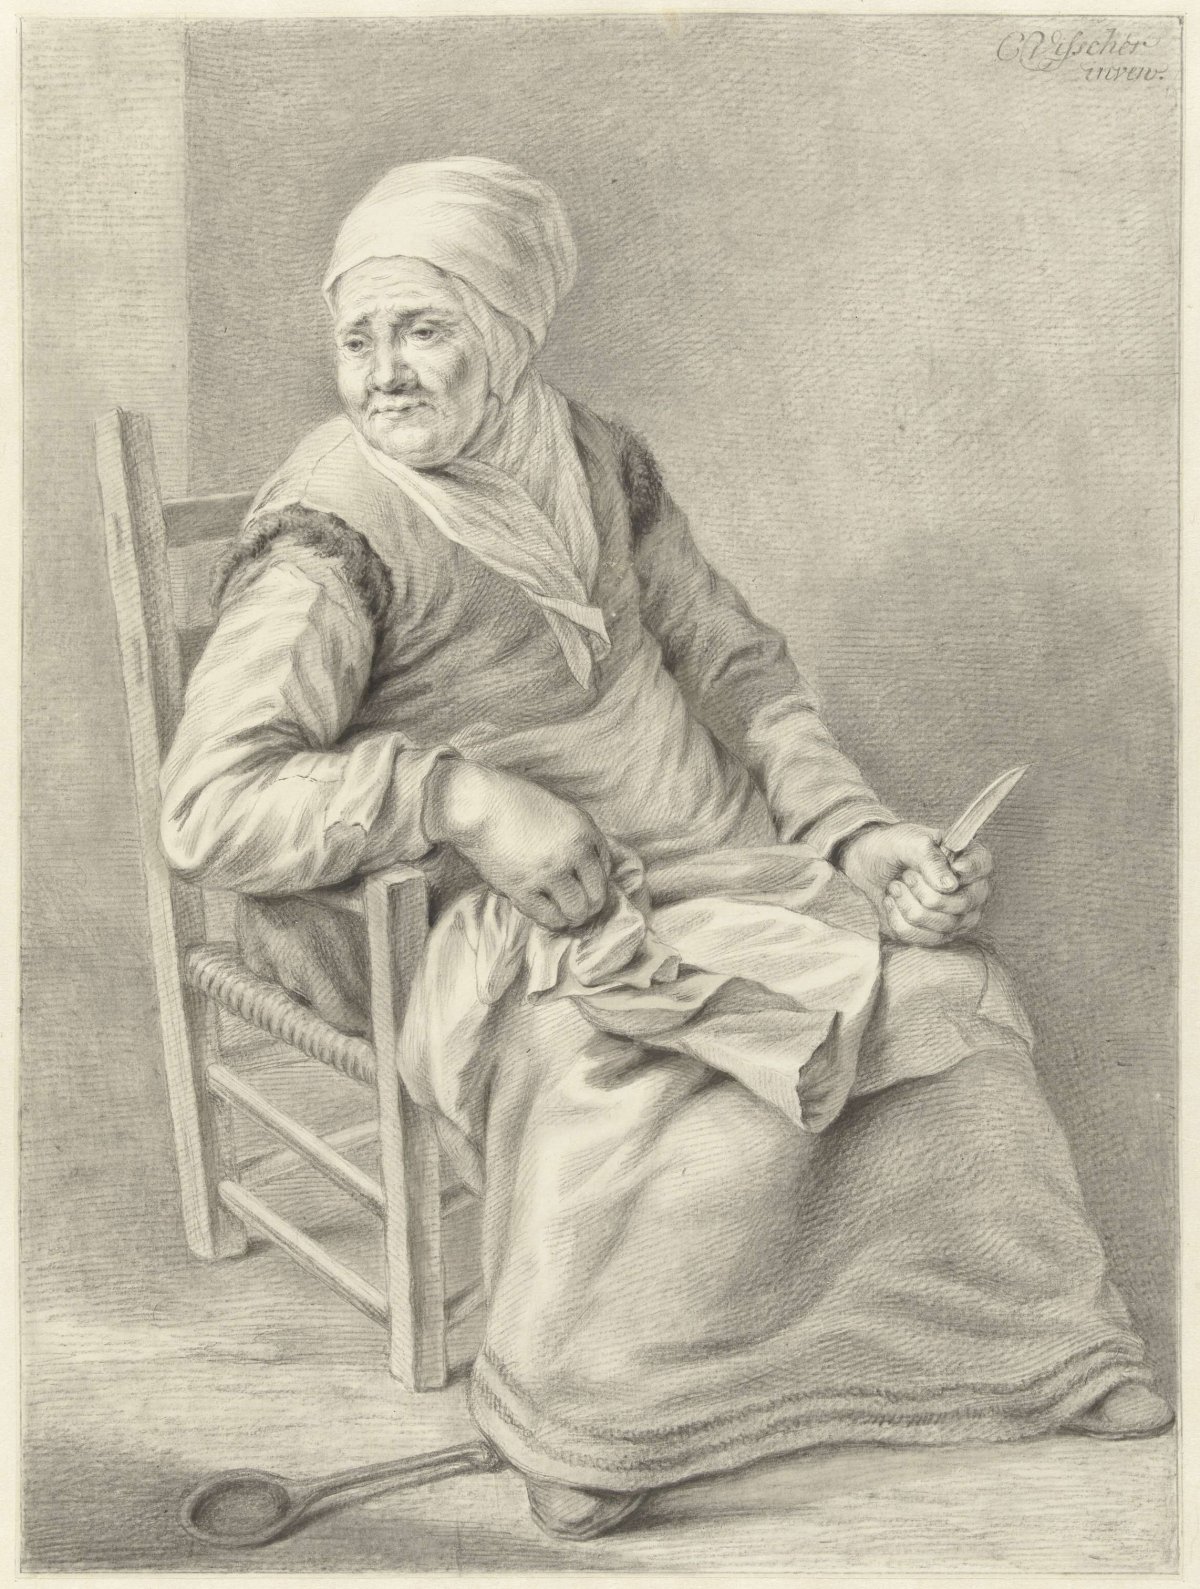 Seated woman with knife, Abraham Delfos, 1741 - 1820